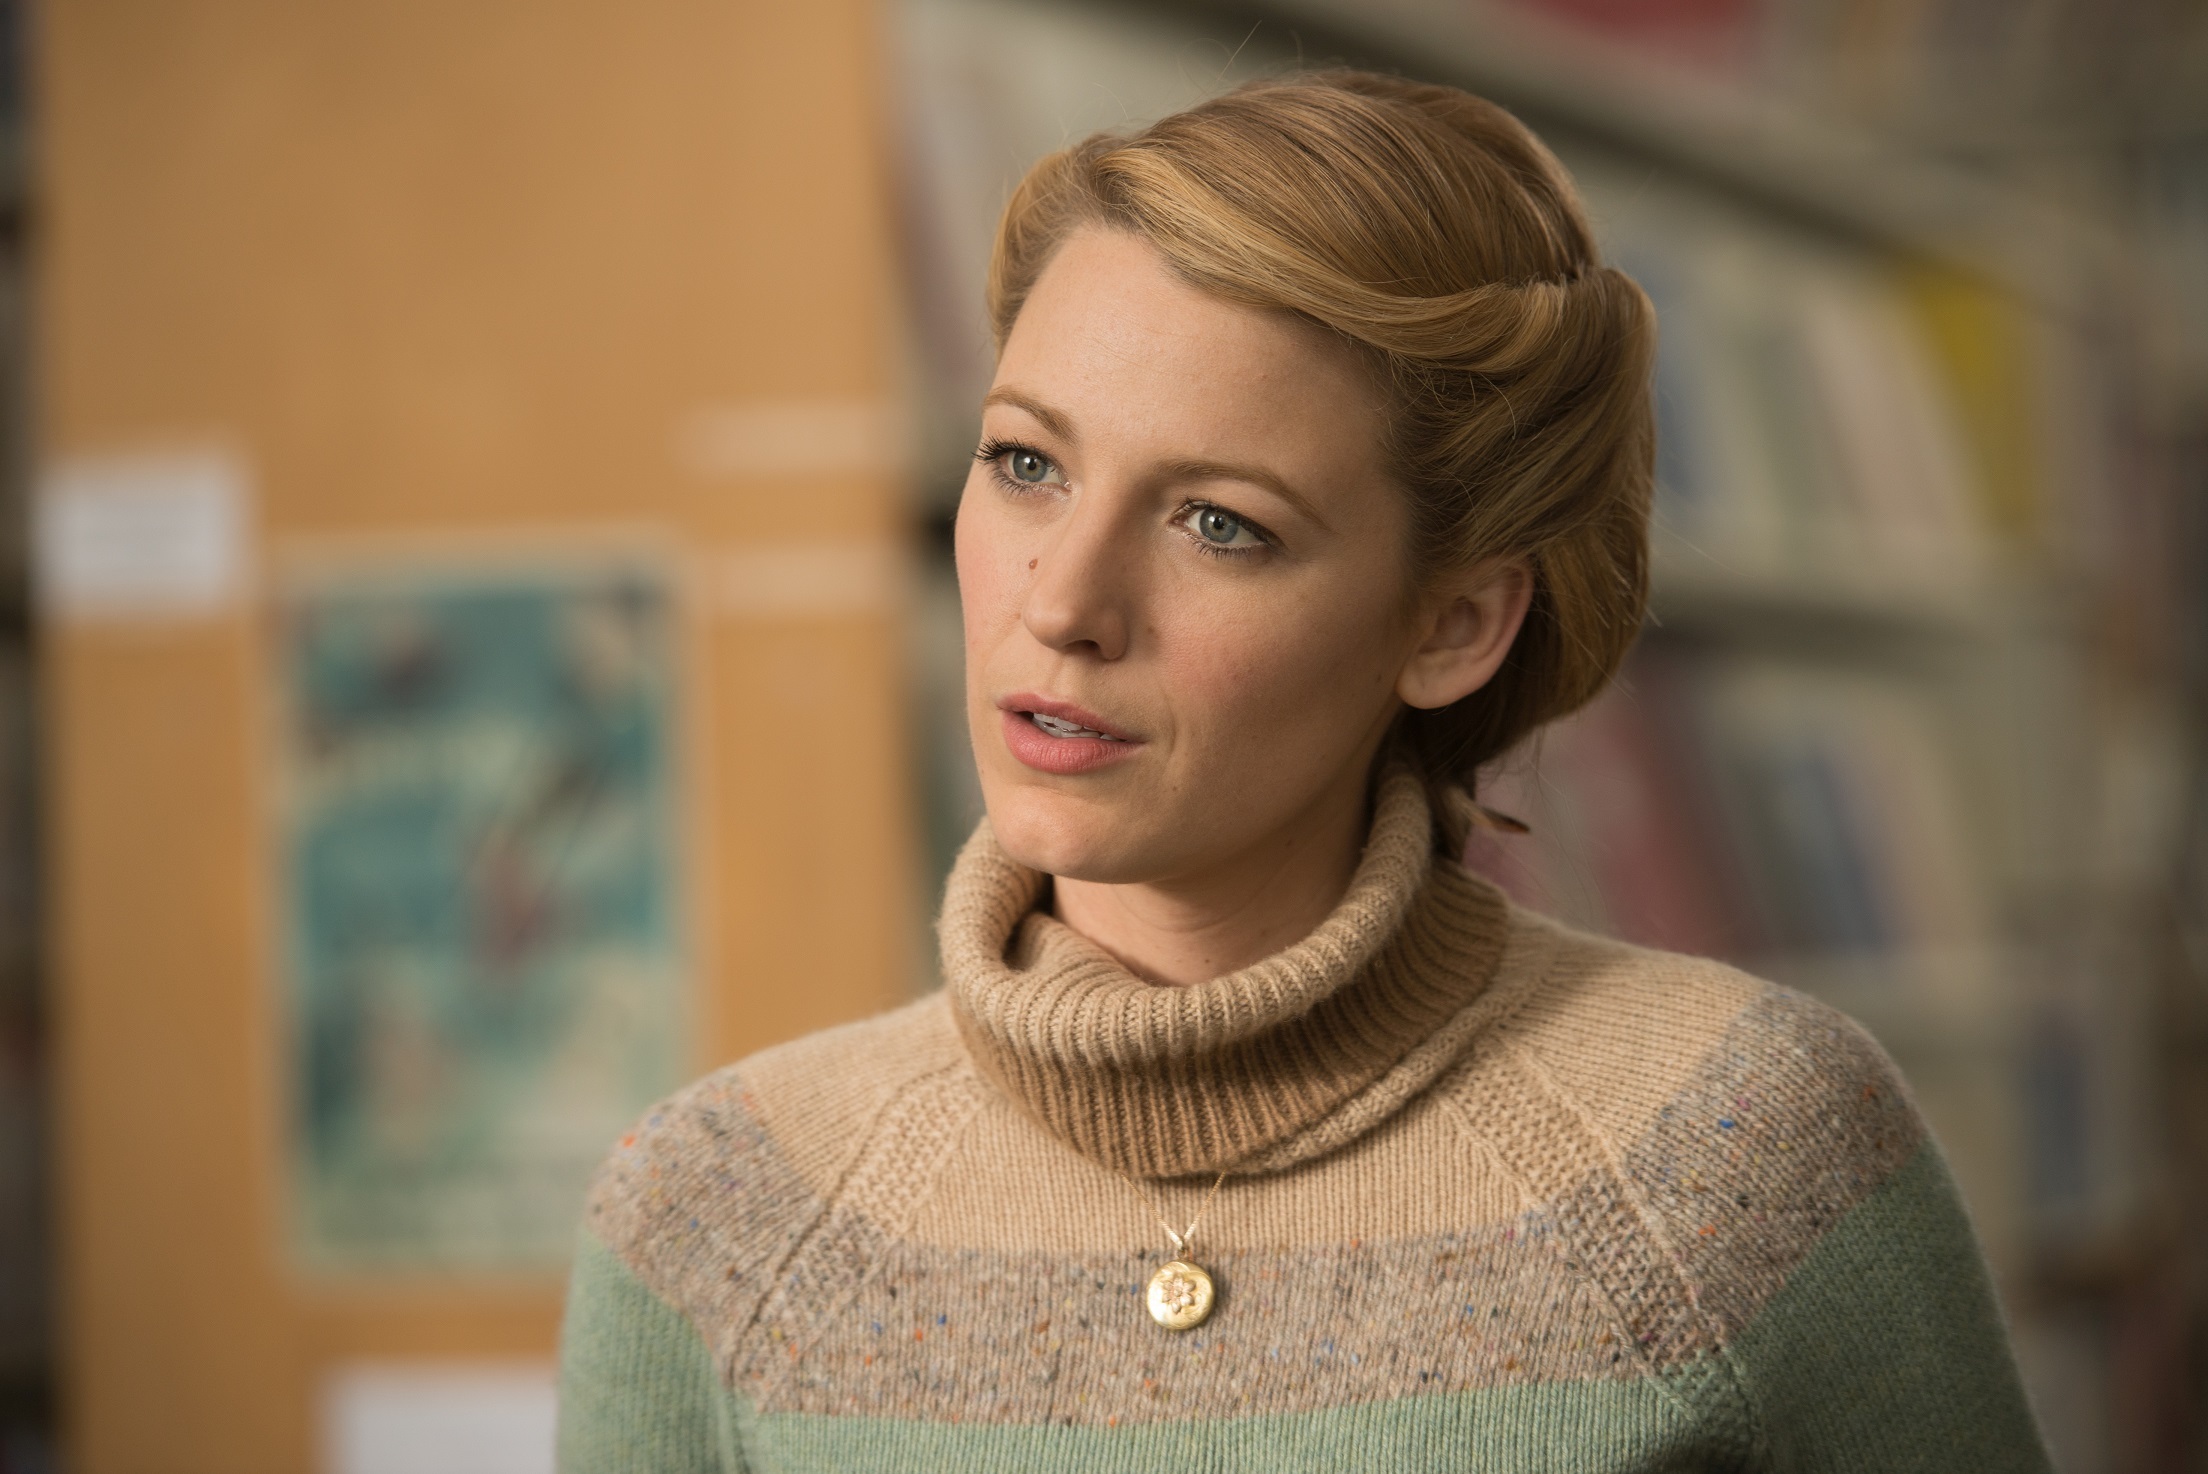 Blake Lively The Age Of Adaline 2208x1474